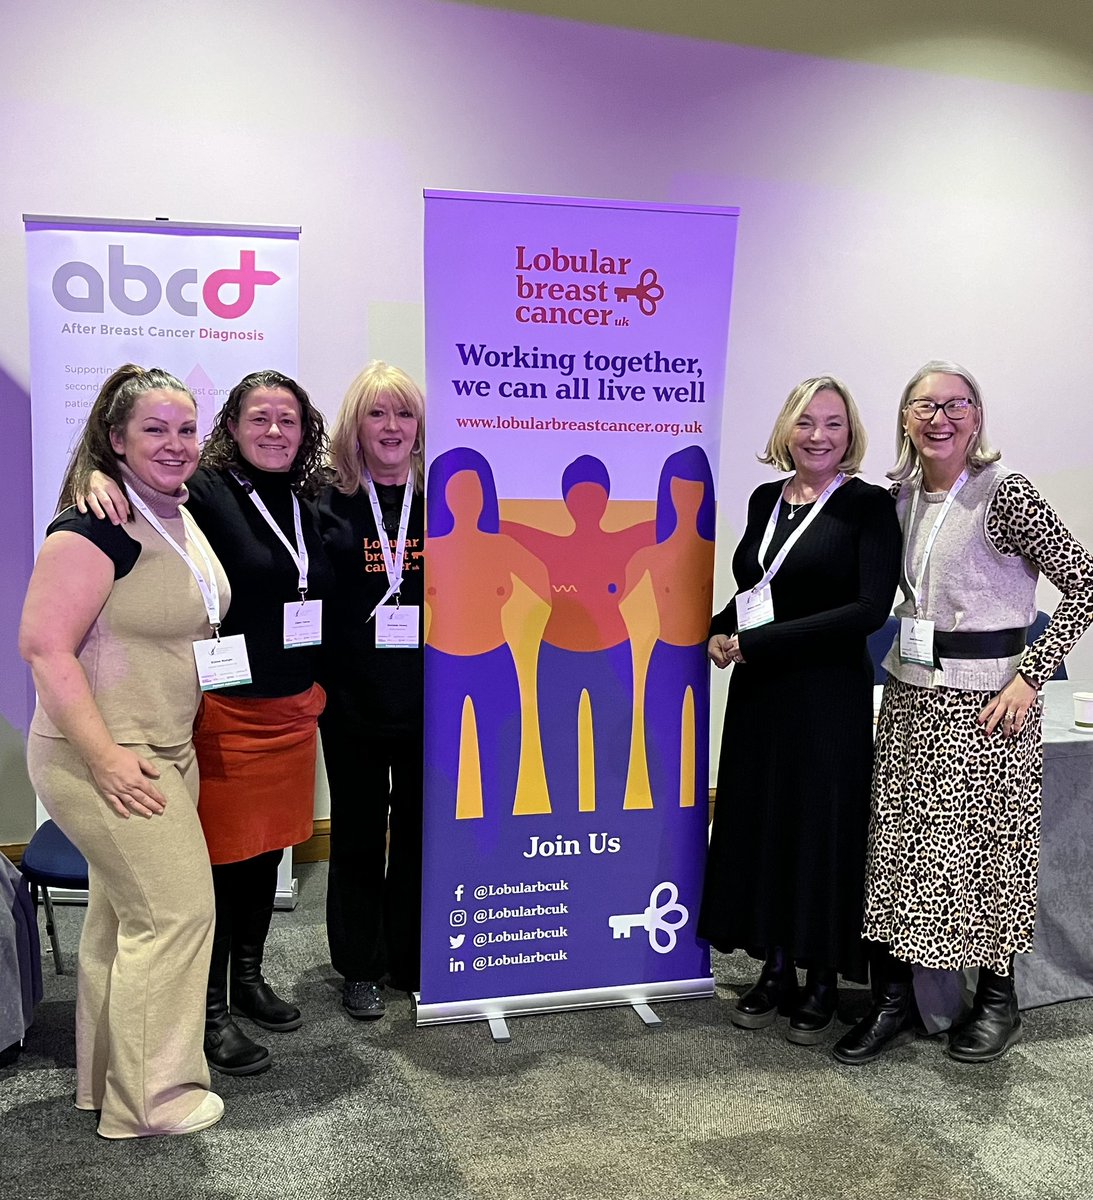 Sharing information about our patient experience of #LobularBreastCancer at @TheUKIBCS @darlaine_honey @Emmaamos7 @laineyroo @ruthred8 @ClaireTTweets